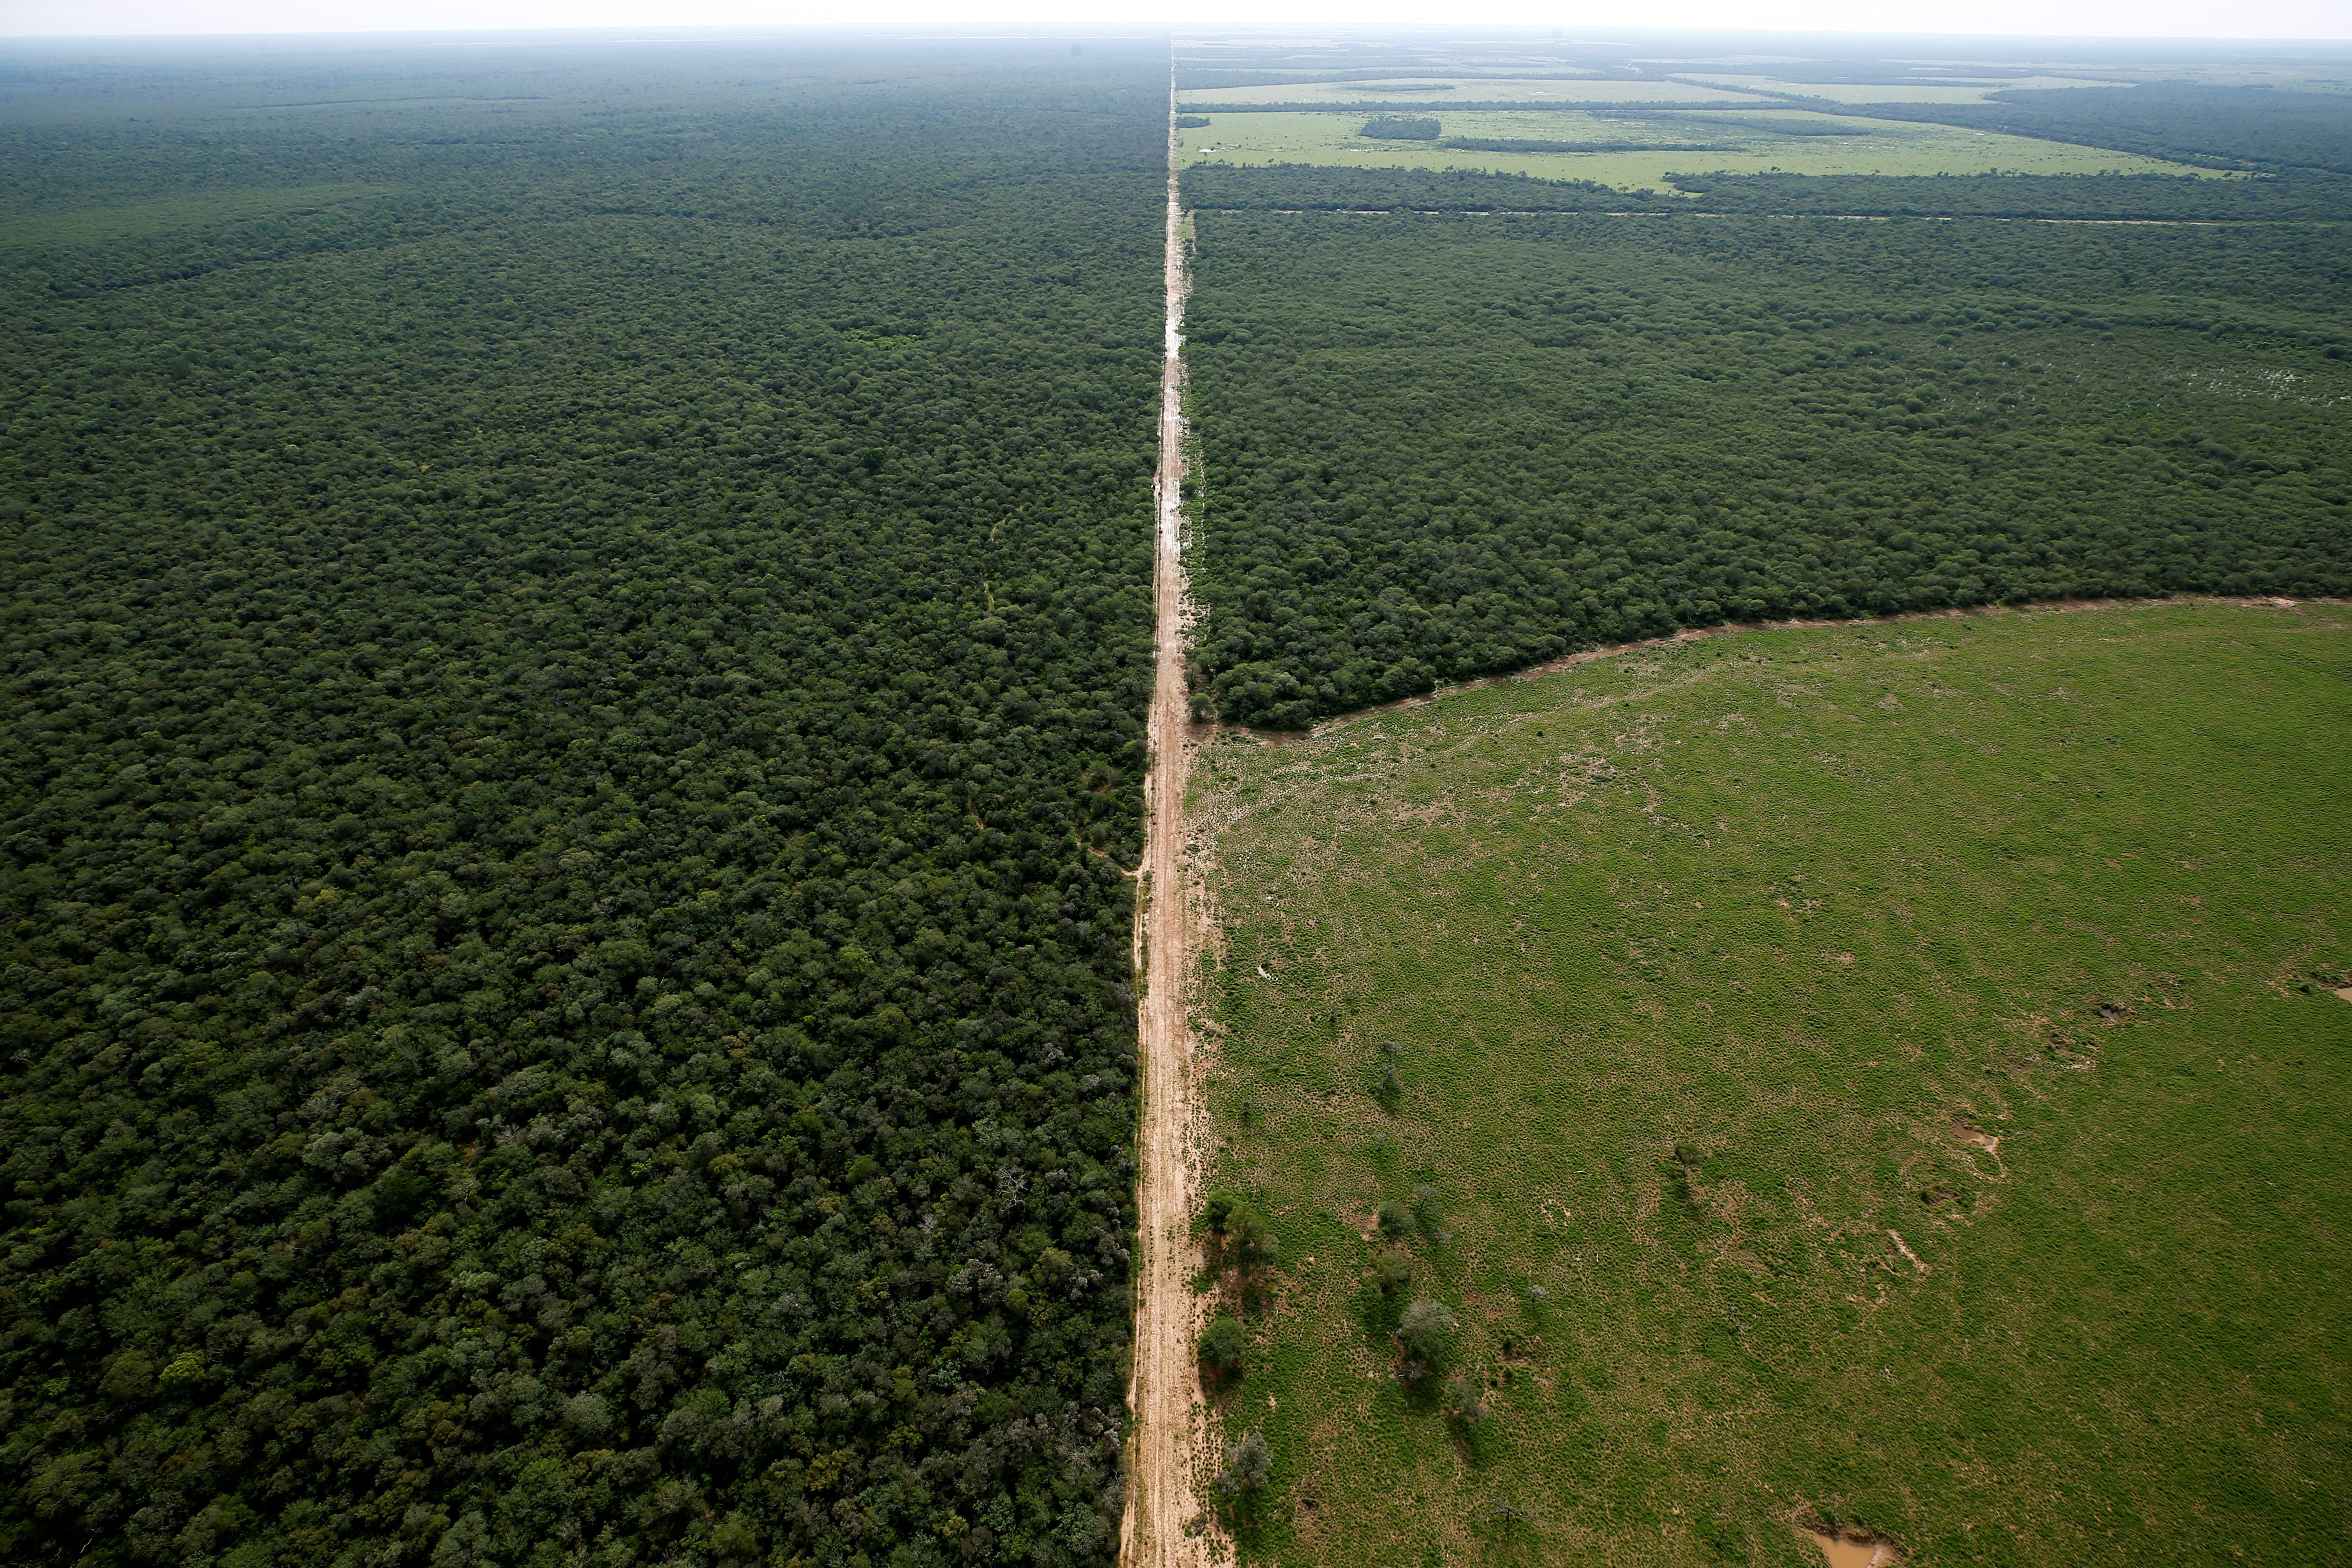 An aerial view shows forested and deforested areas near Las Lomitas in Formosa, Argentina